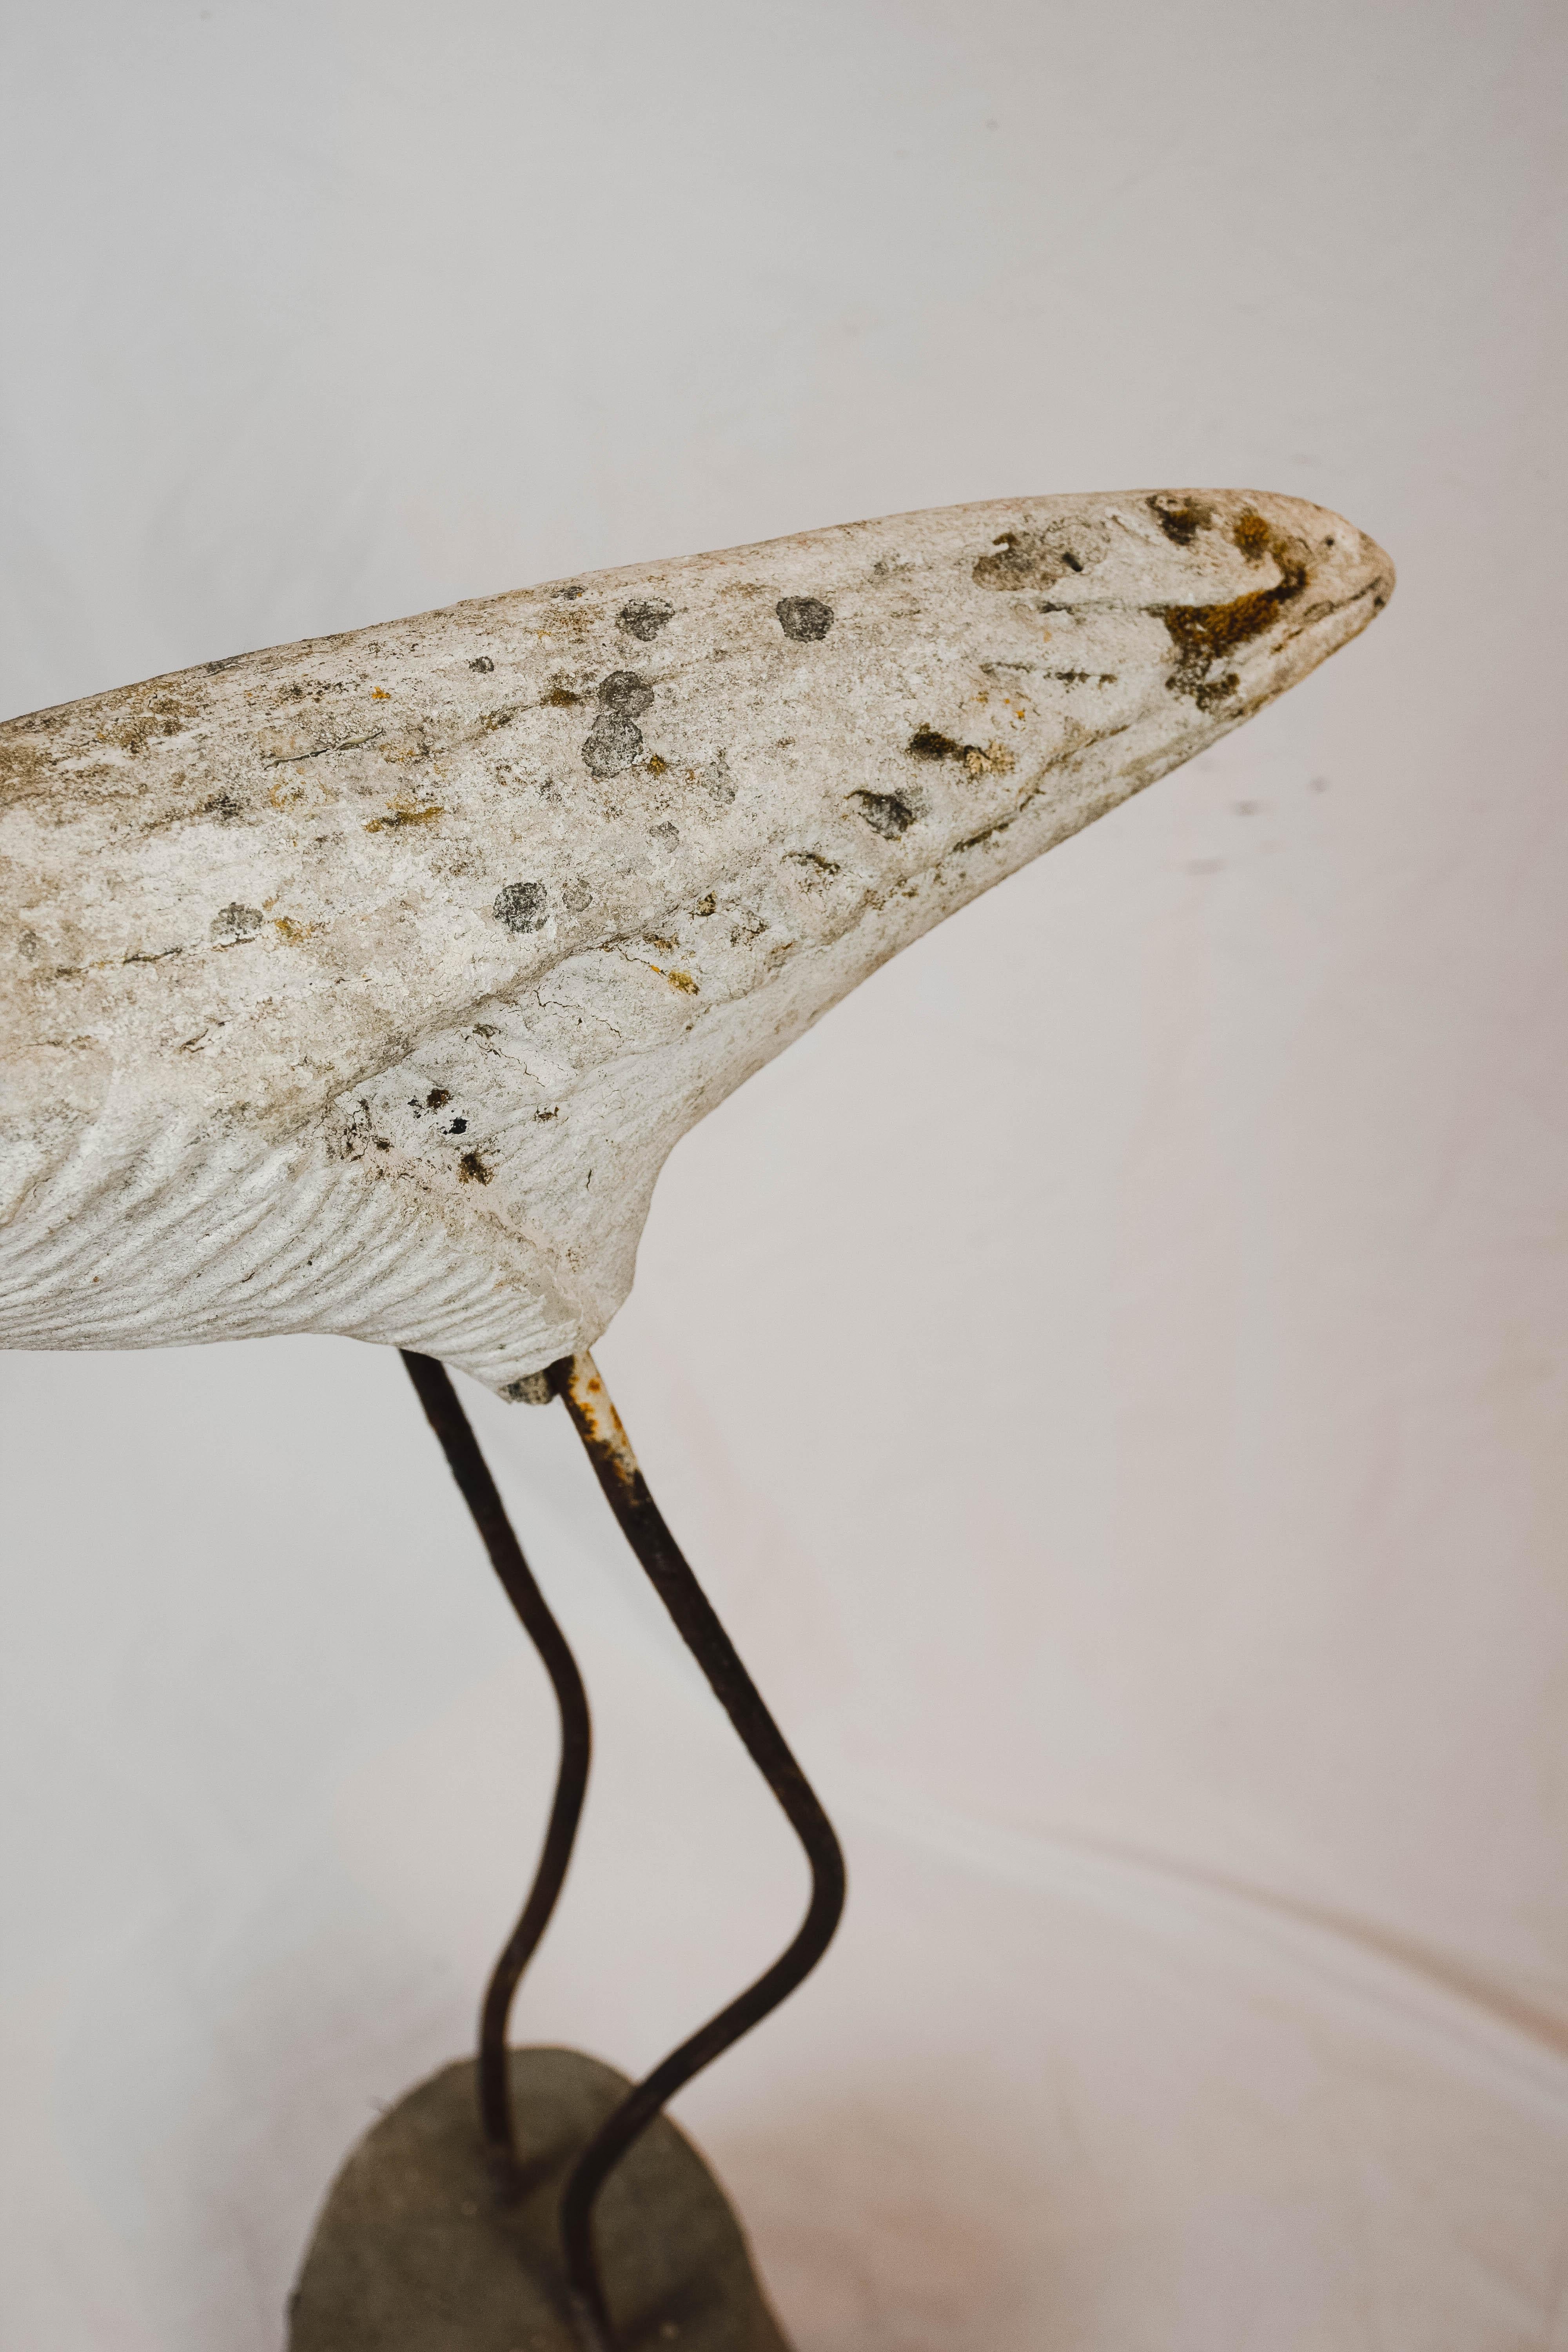 We found this charming concrete flamingo in France. Heavy and sturdy, the concrete bird stands solidly on legs made of iron sunk into a concrete base. The body of the flamingo retains much of its original paint which has been worn and dulled by age